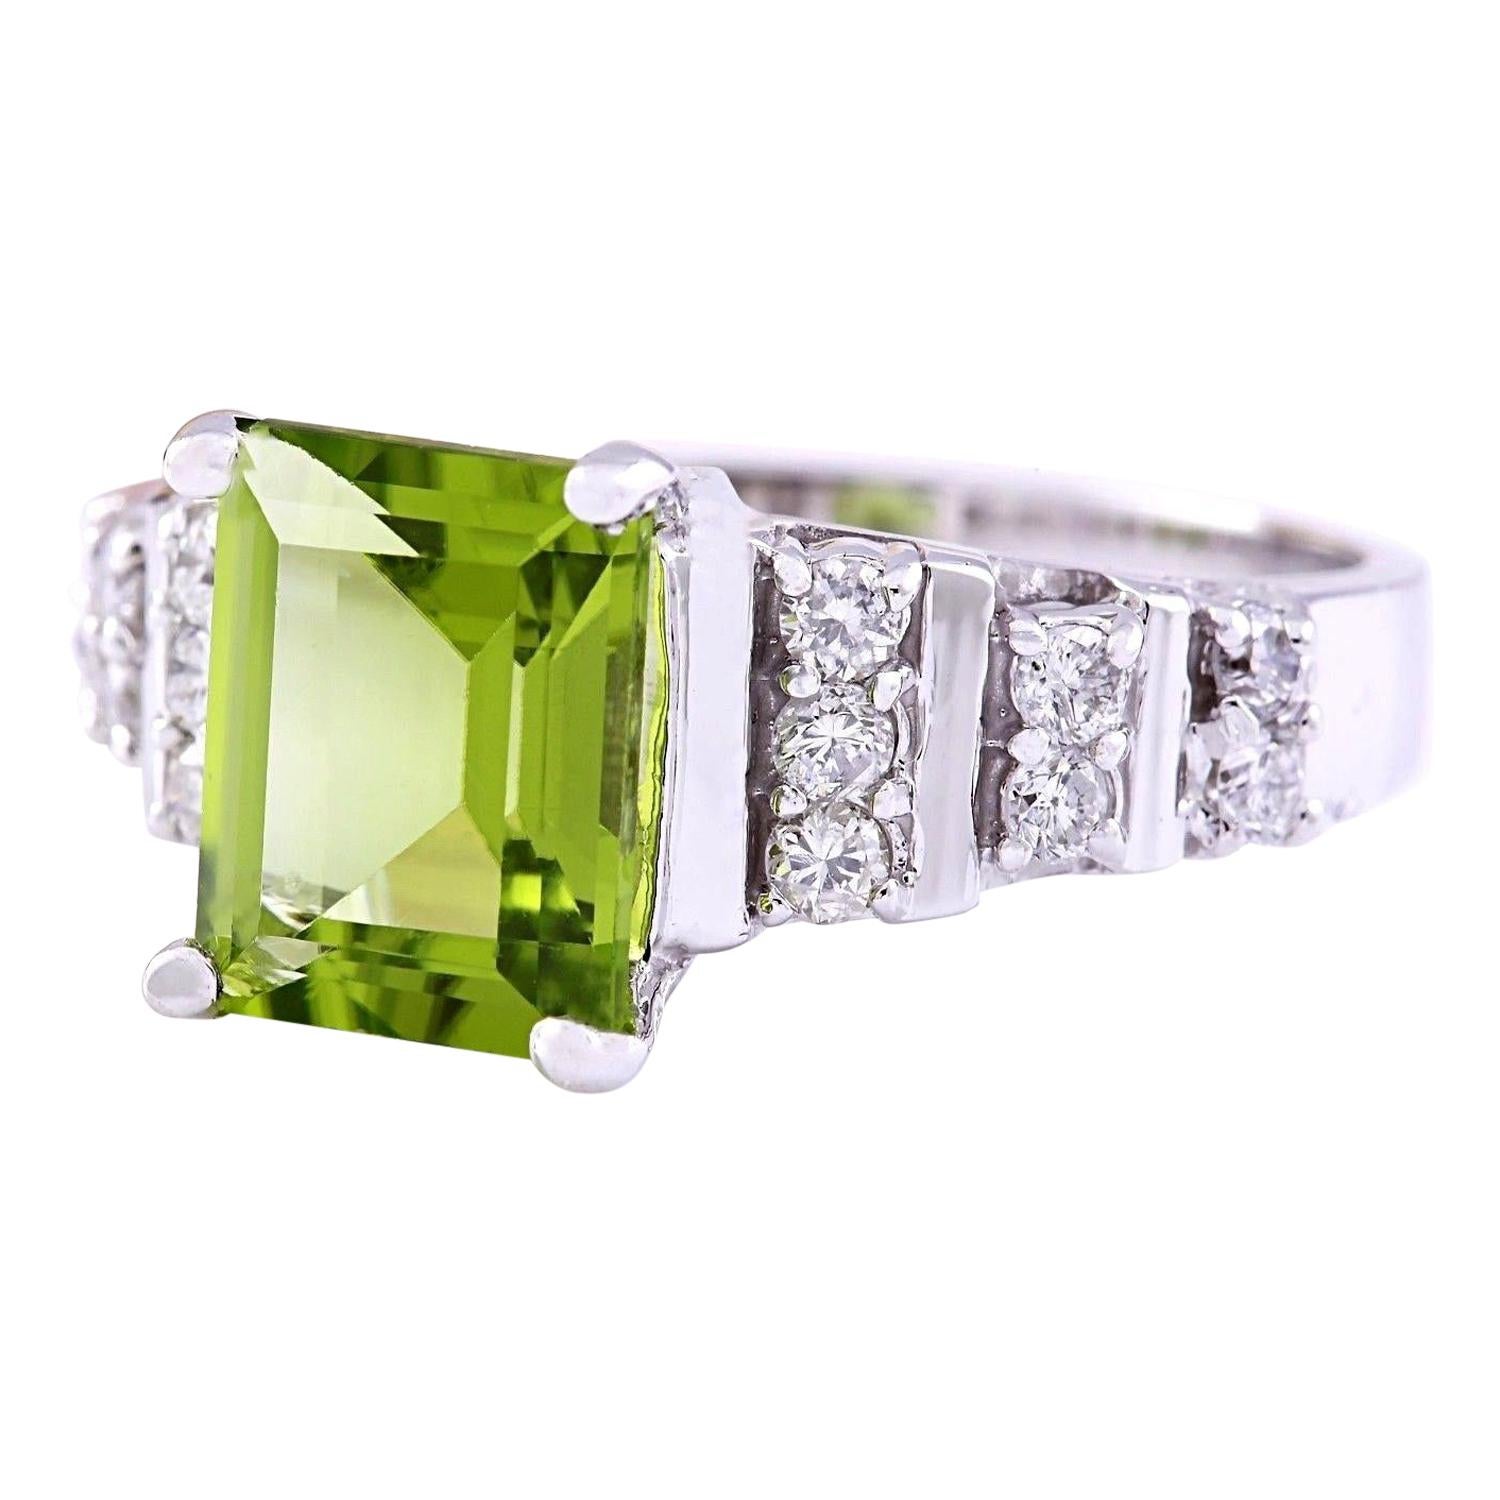 Introducing our stunning 14K Solid White Gold Diamond Ring adorned with a captivating 3.05 Carat Natural Peridot centerpiece. Crafted with precision and elegance, this ring is a true statement of sophistication. The mainstone, a vibrant Peridot